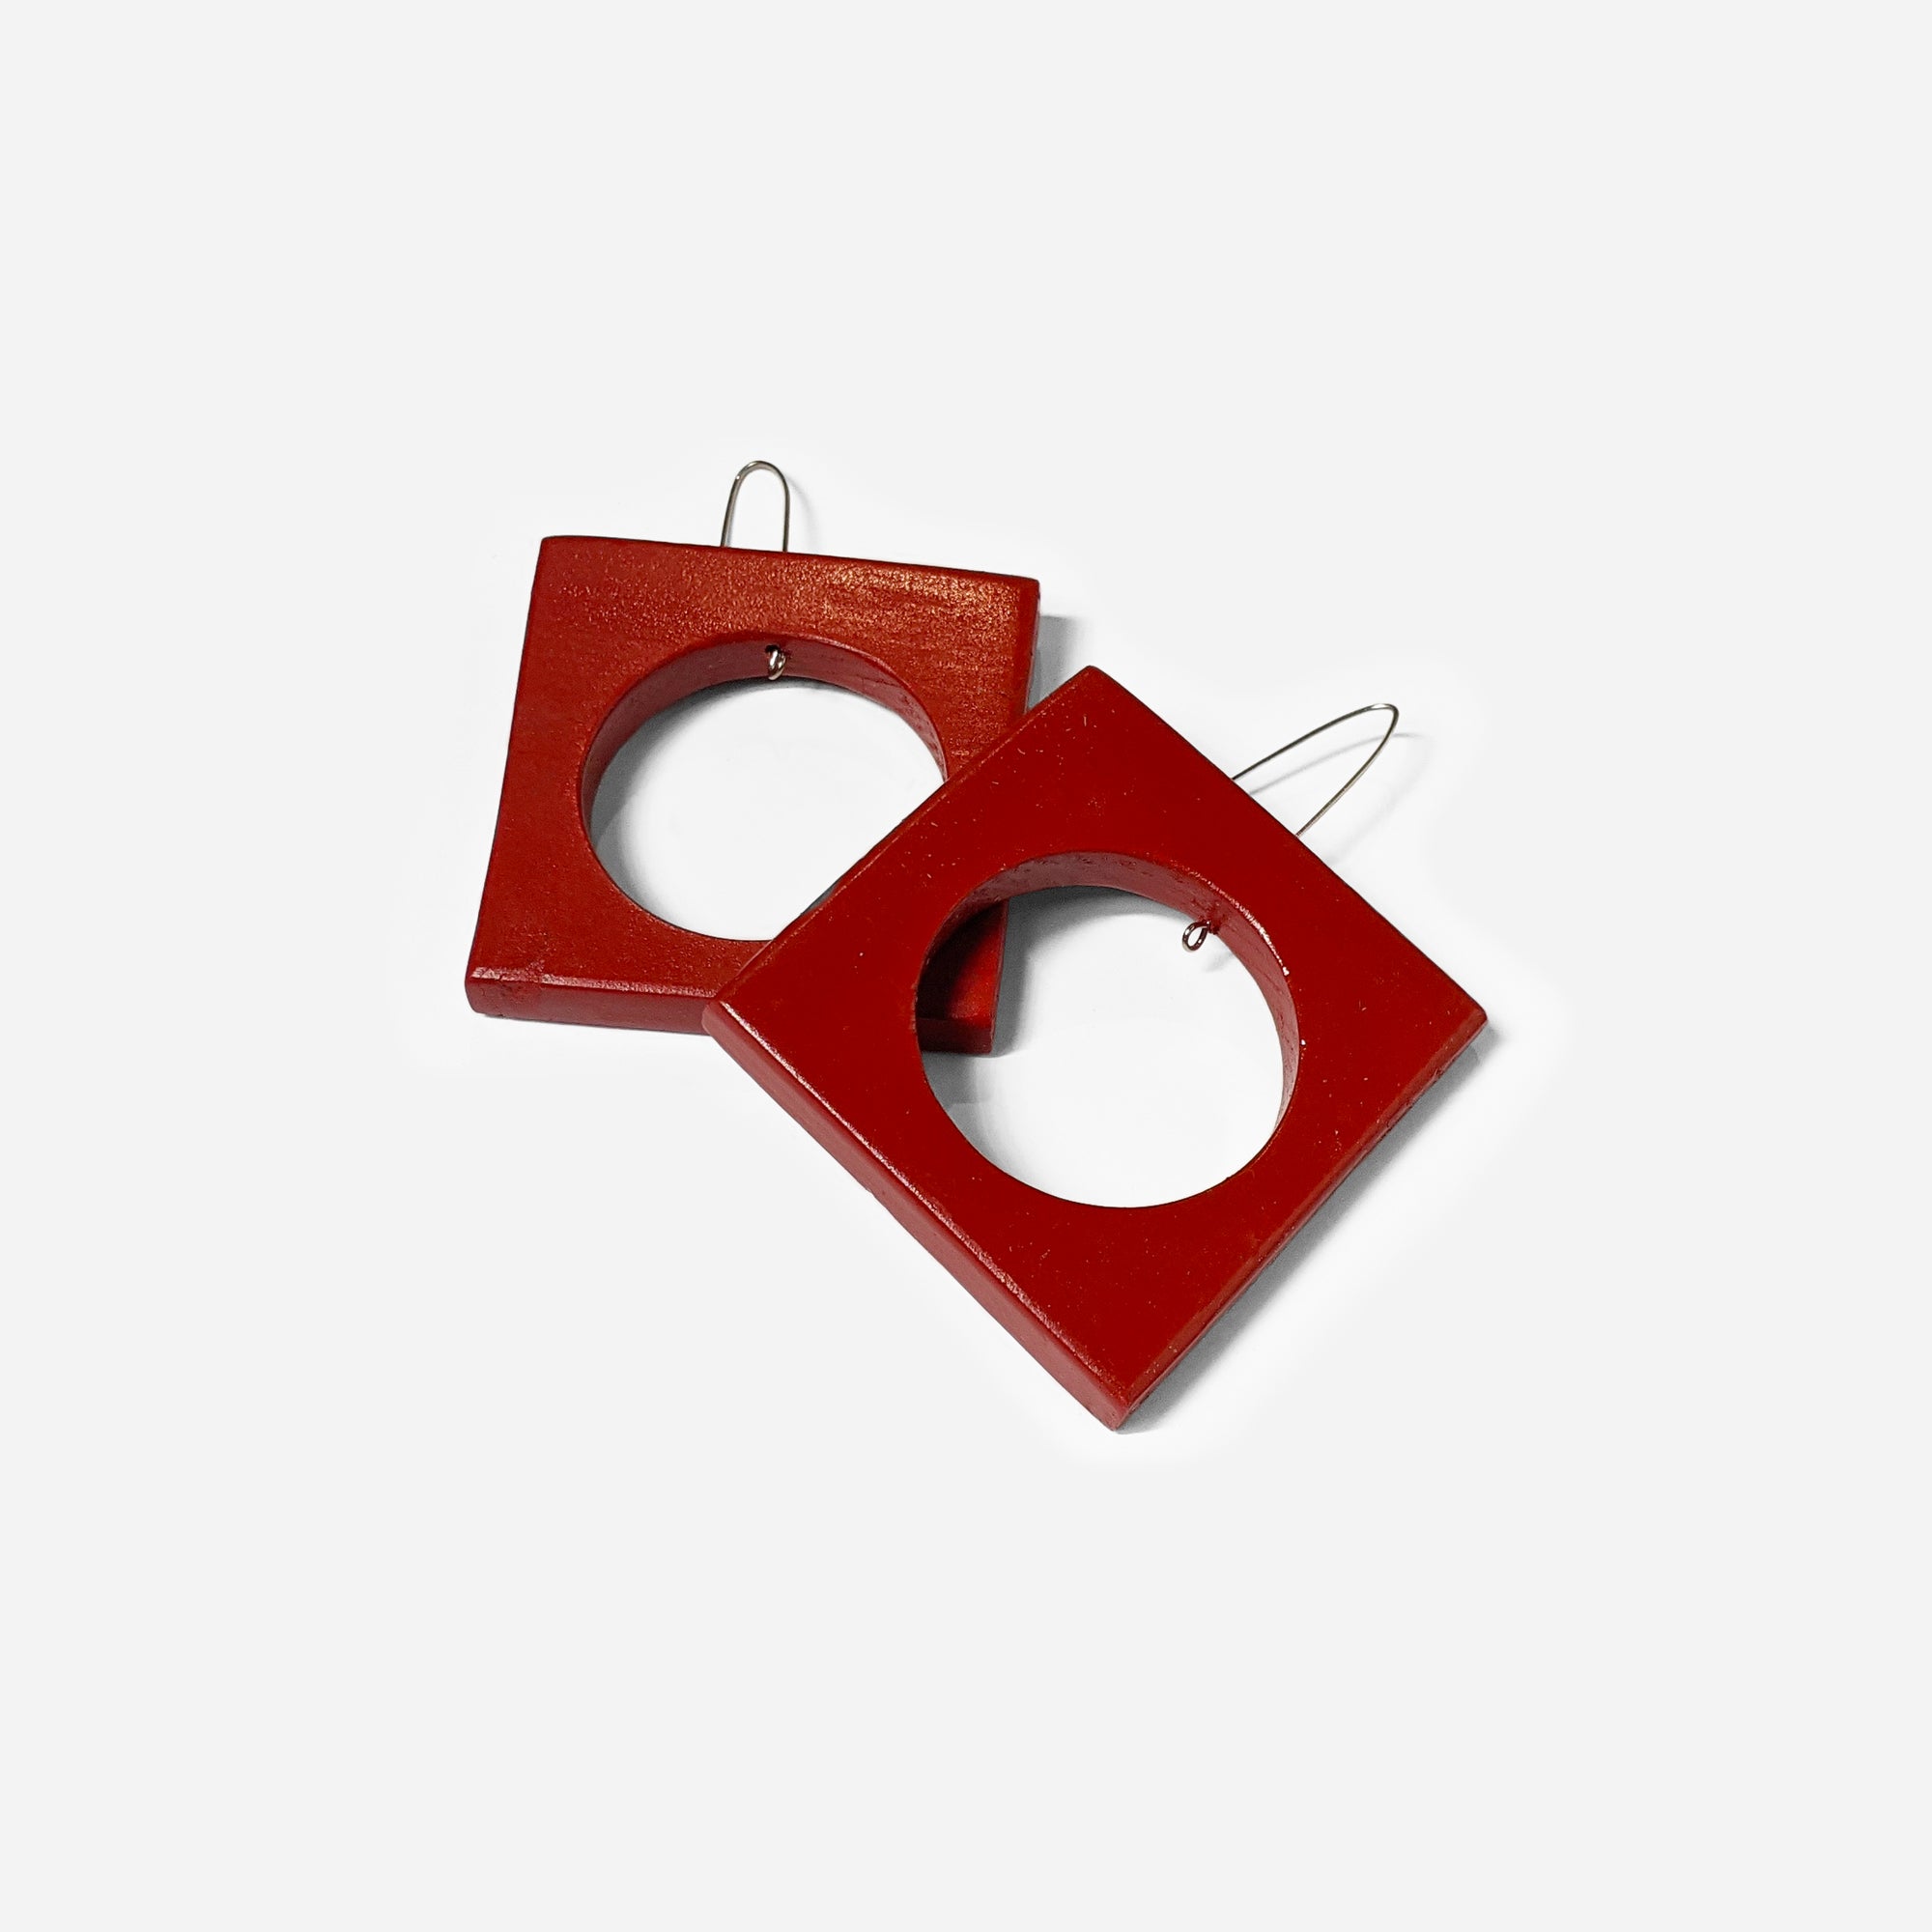 Hole in Square Earrings (by Gary Harrell)